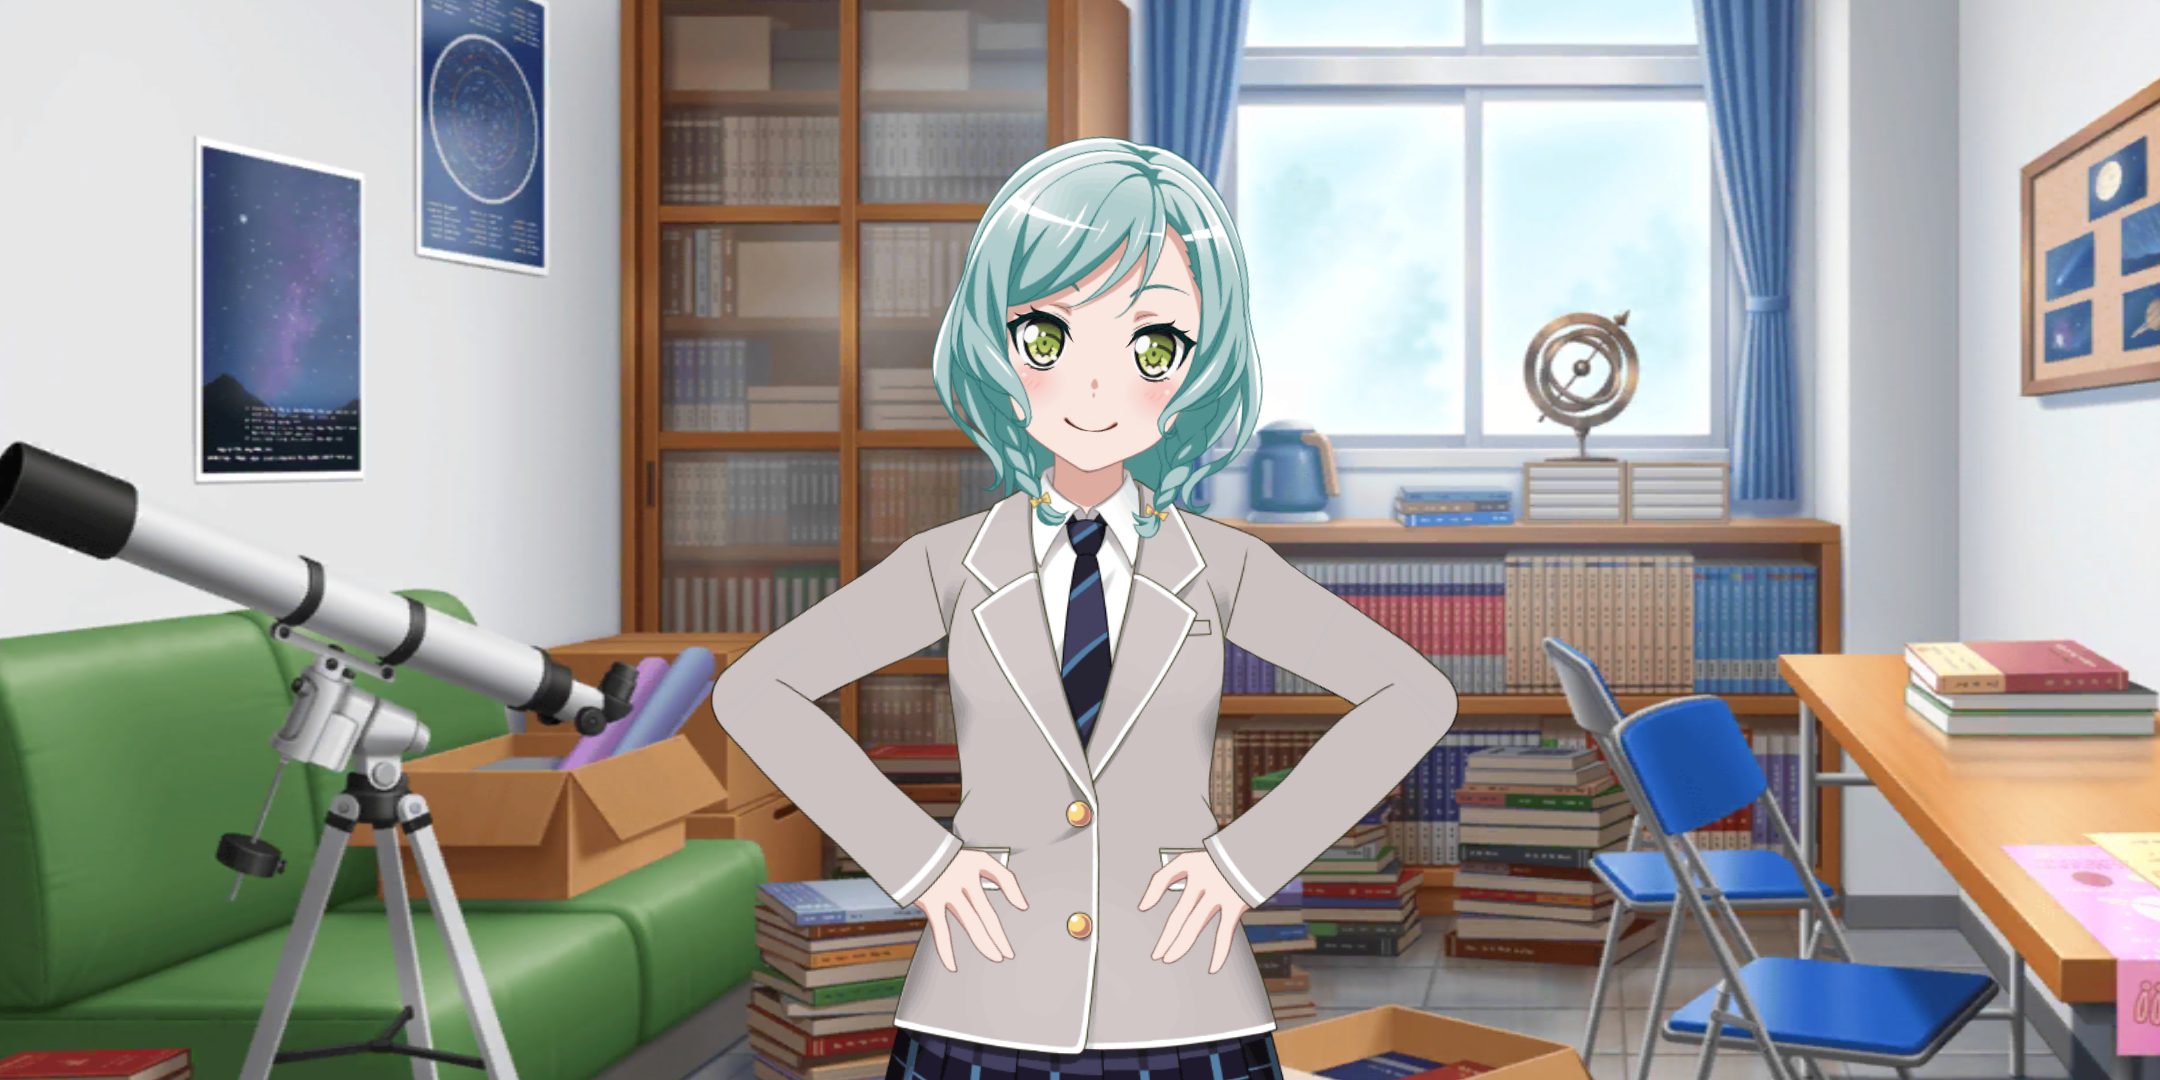 Hey does anyone remember that book Hina was holding when she ran